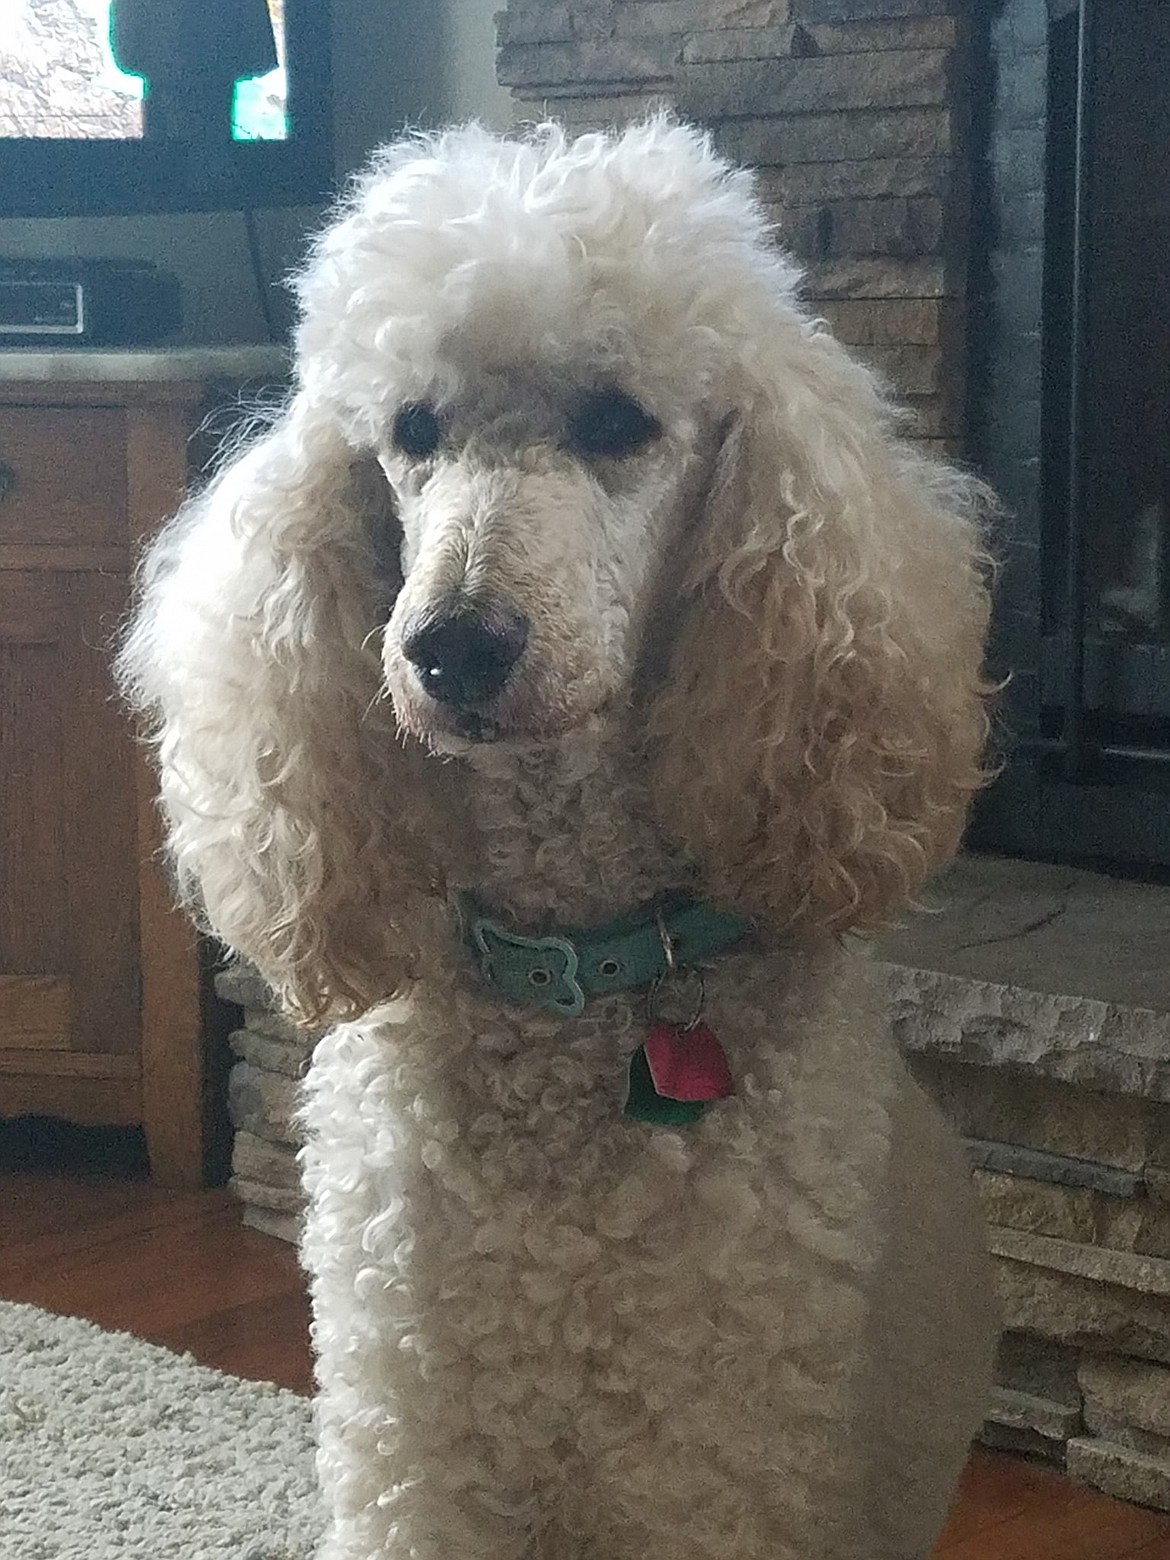 "Fogarty" is our 12 year old standard apricot poodle. Our "miracle" dog after 10 days being lost in the wilderness.